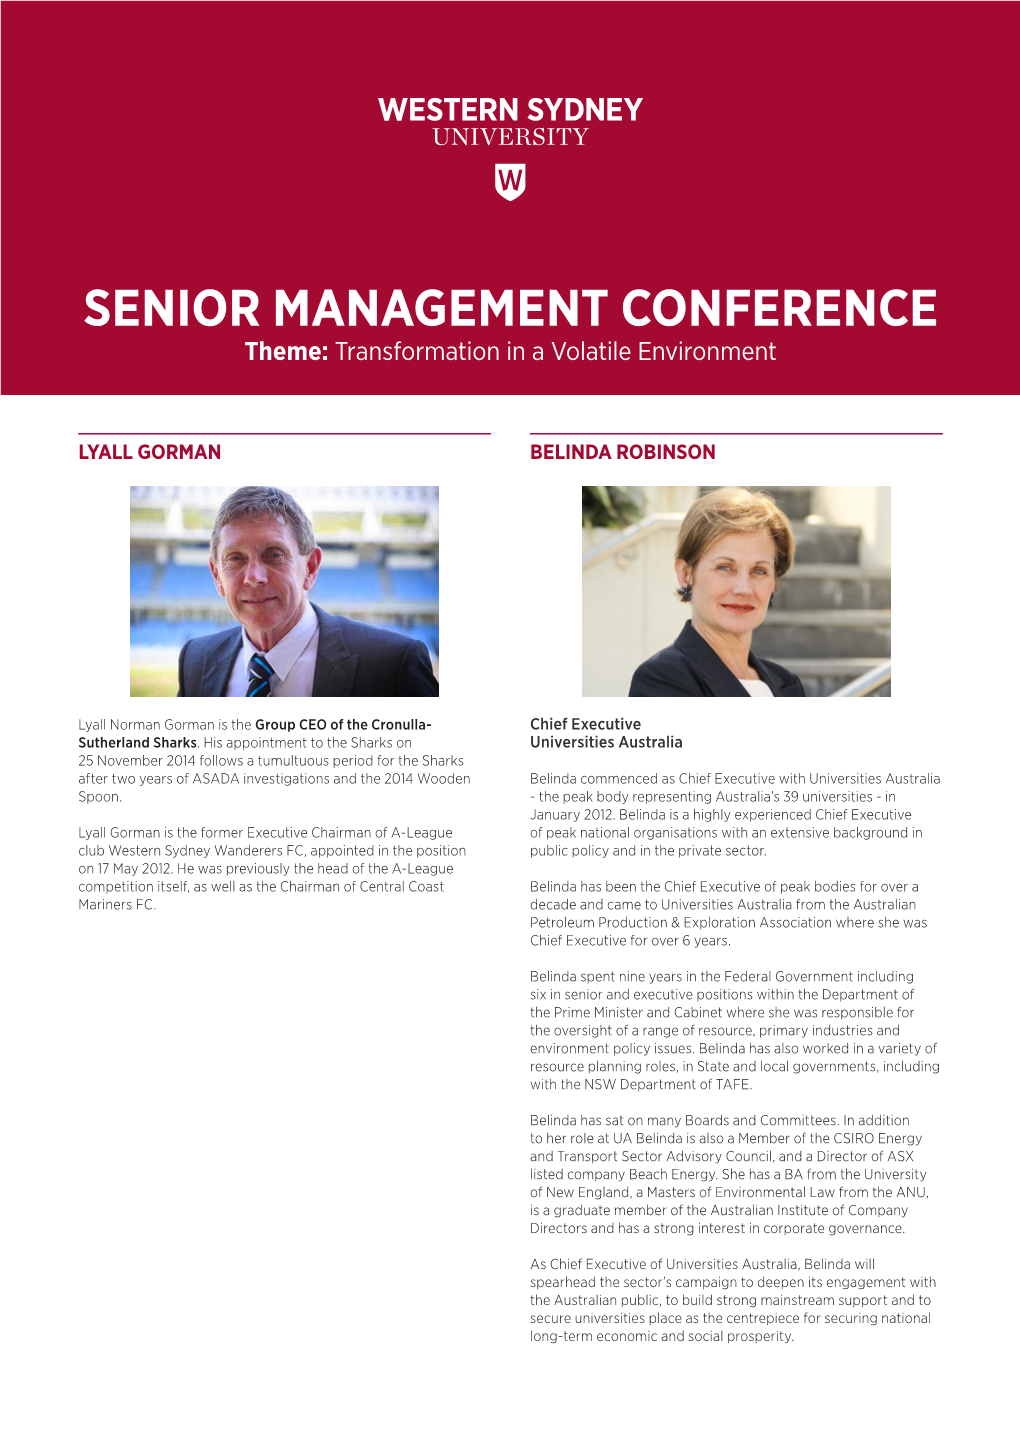 SENIOR MANAGEMENT CONFERENCE Theme: Transformation in a Volatile Environment